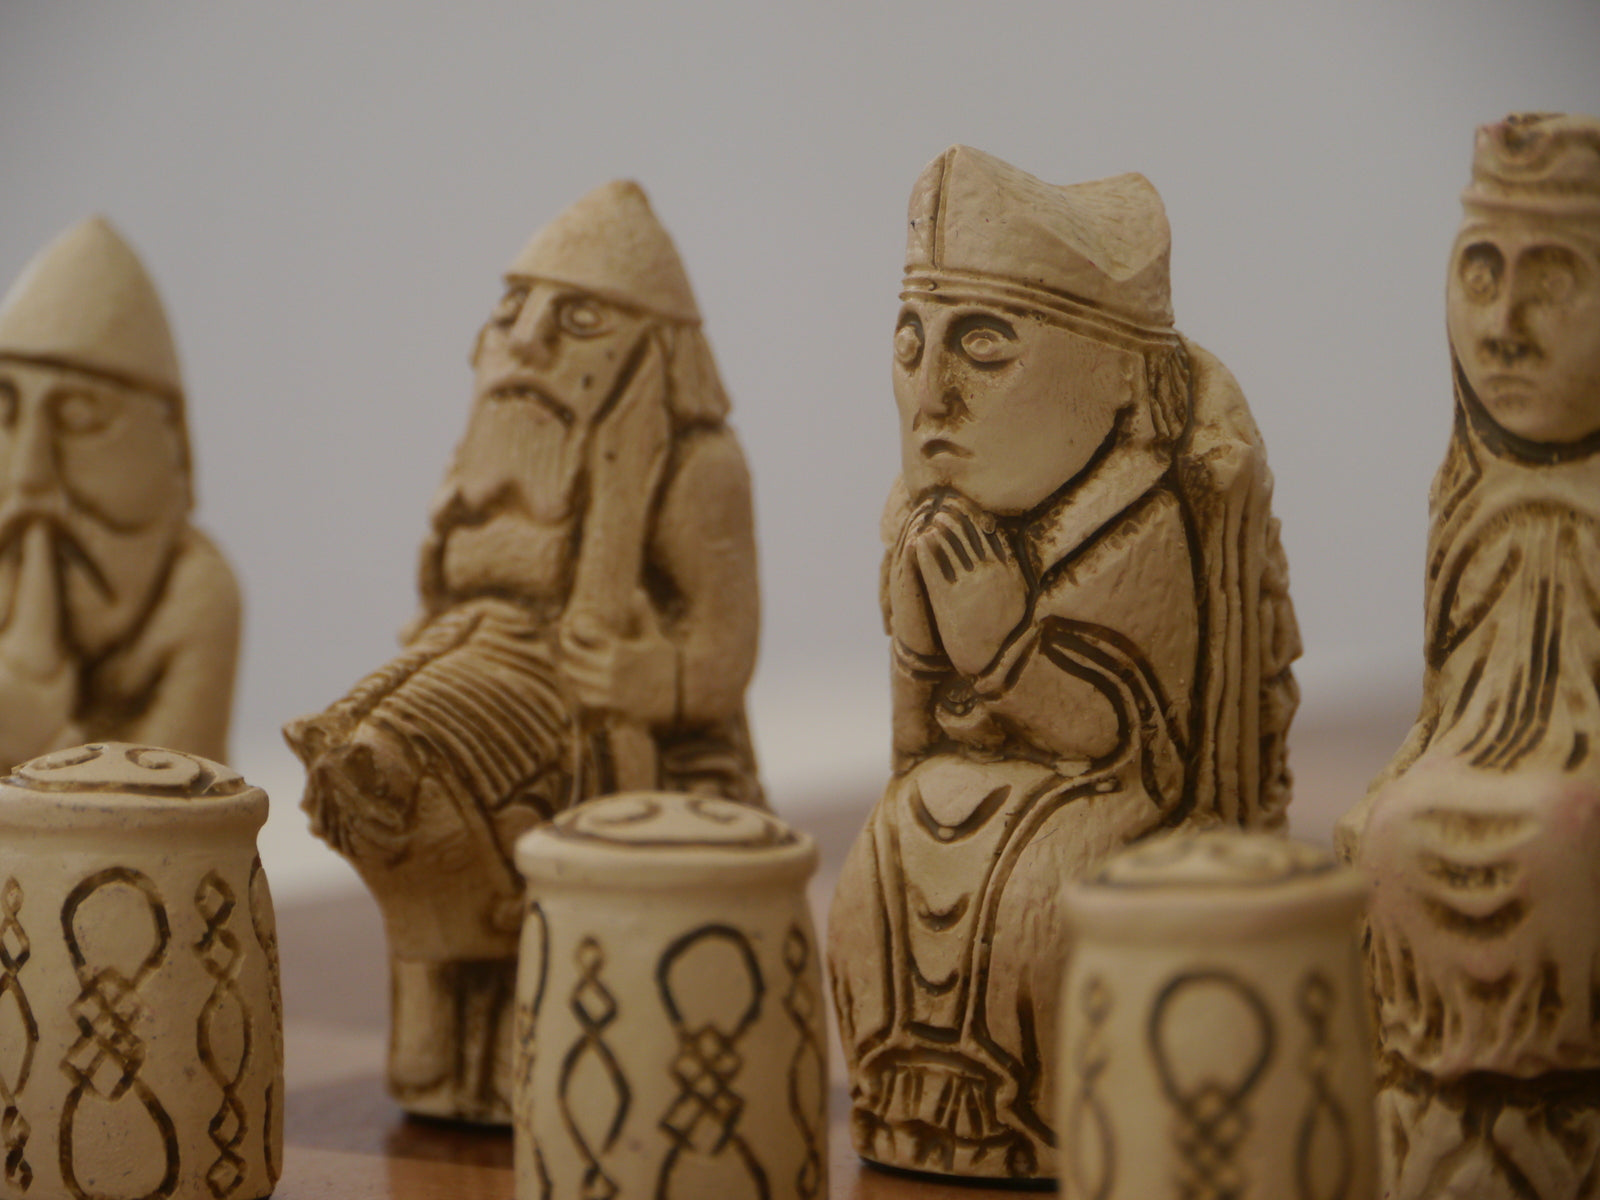 Medieval chess pieces